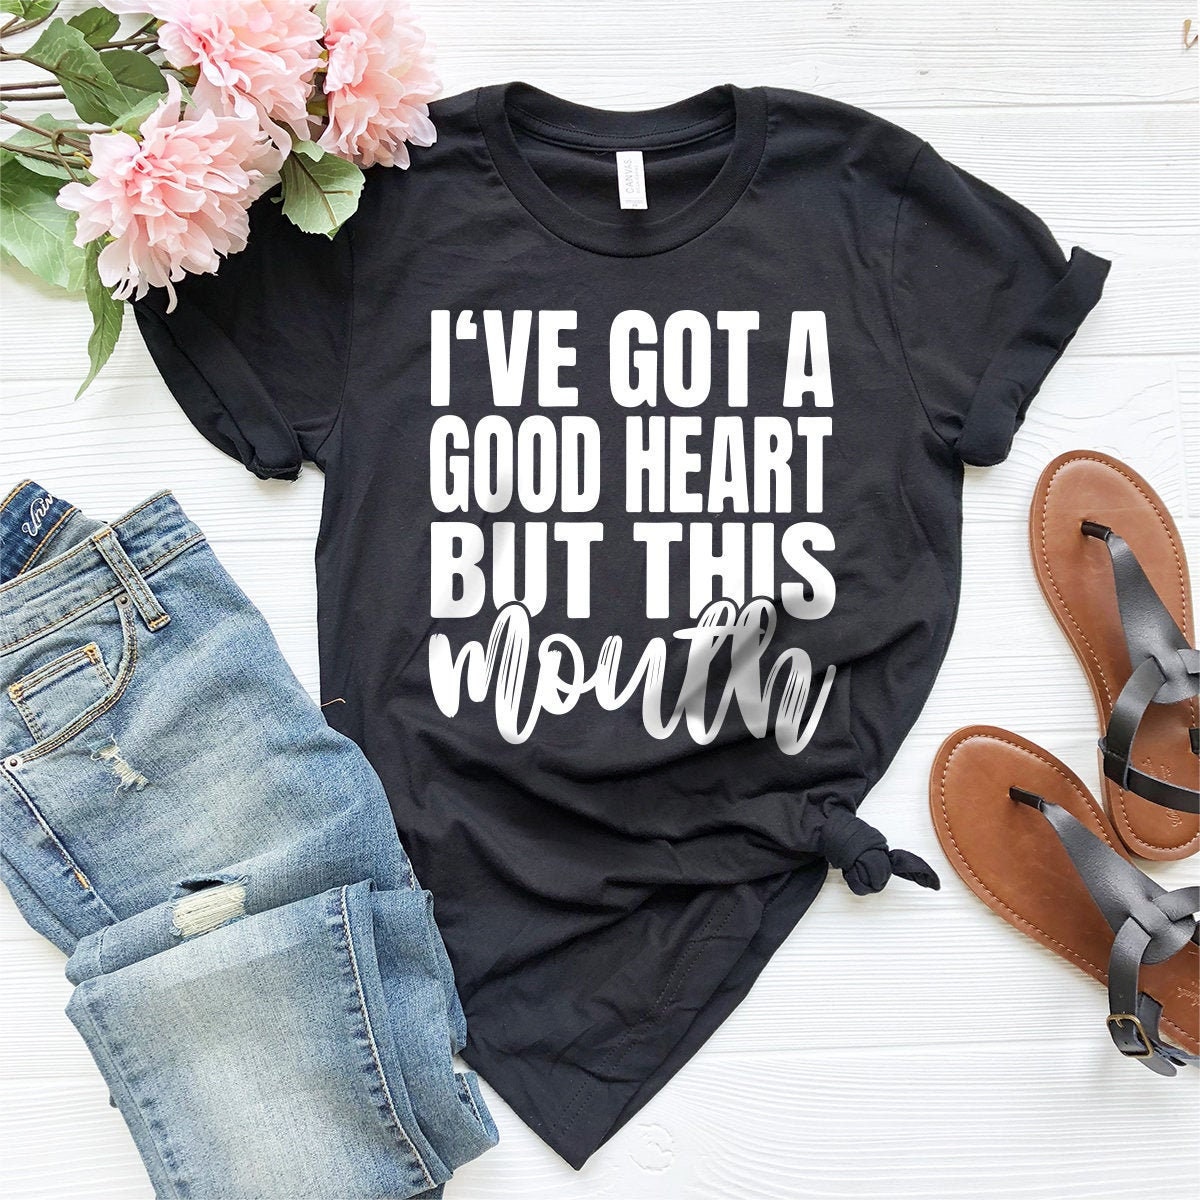 I've Got A Good Heart But This Mouth T-Shirt, Good Heart Tshirt, Sarcastic Shirt, Mothers Day Shirt, Sassy Quote Shirt, Cuss Words Shirt - Fastdeliverytees.com